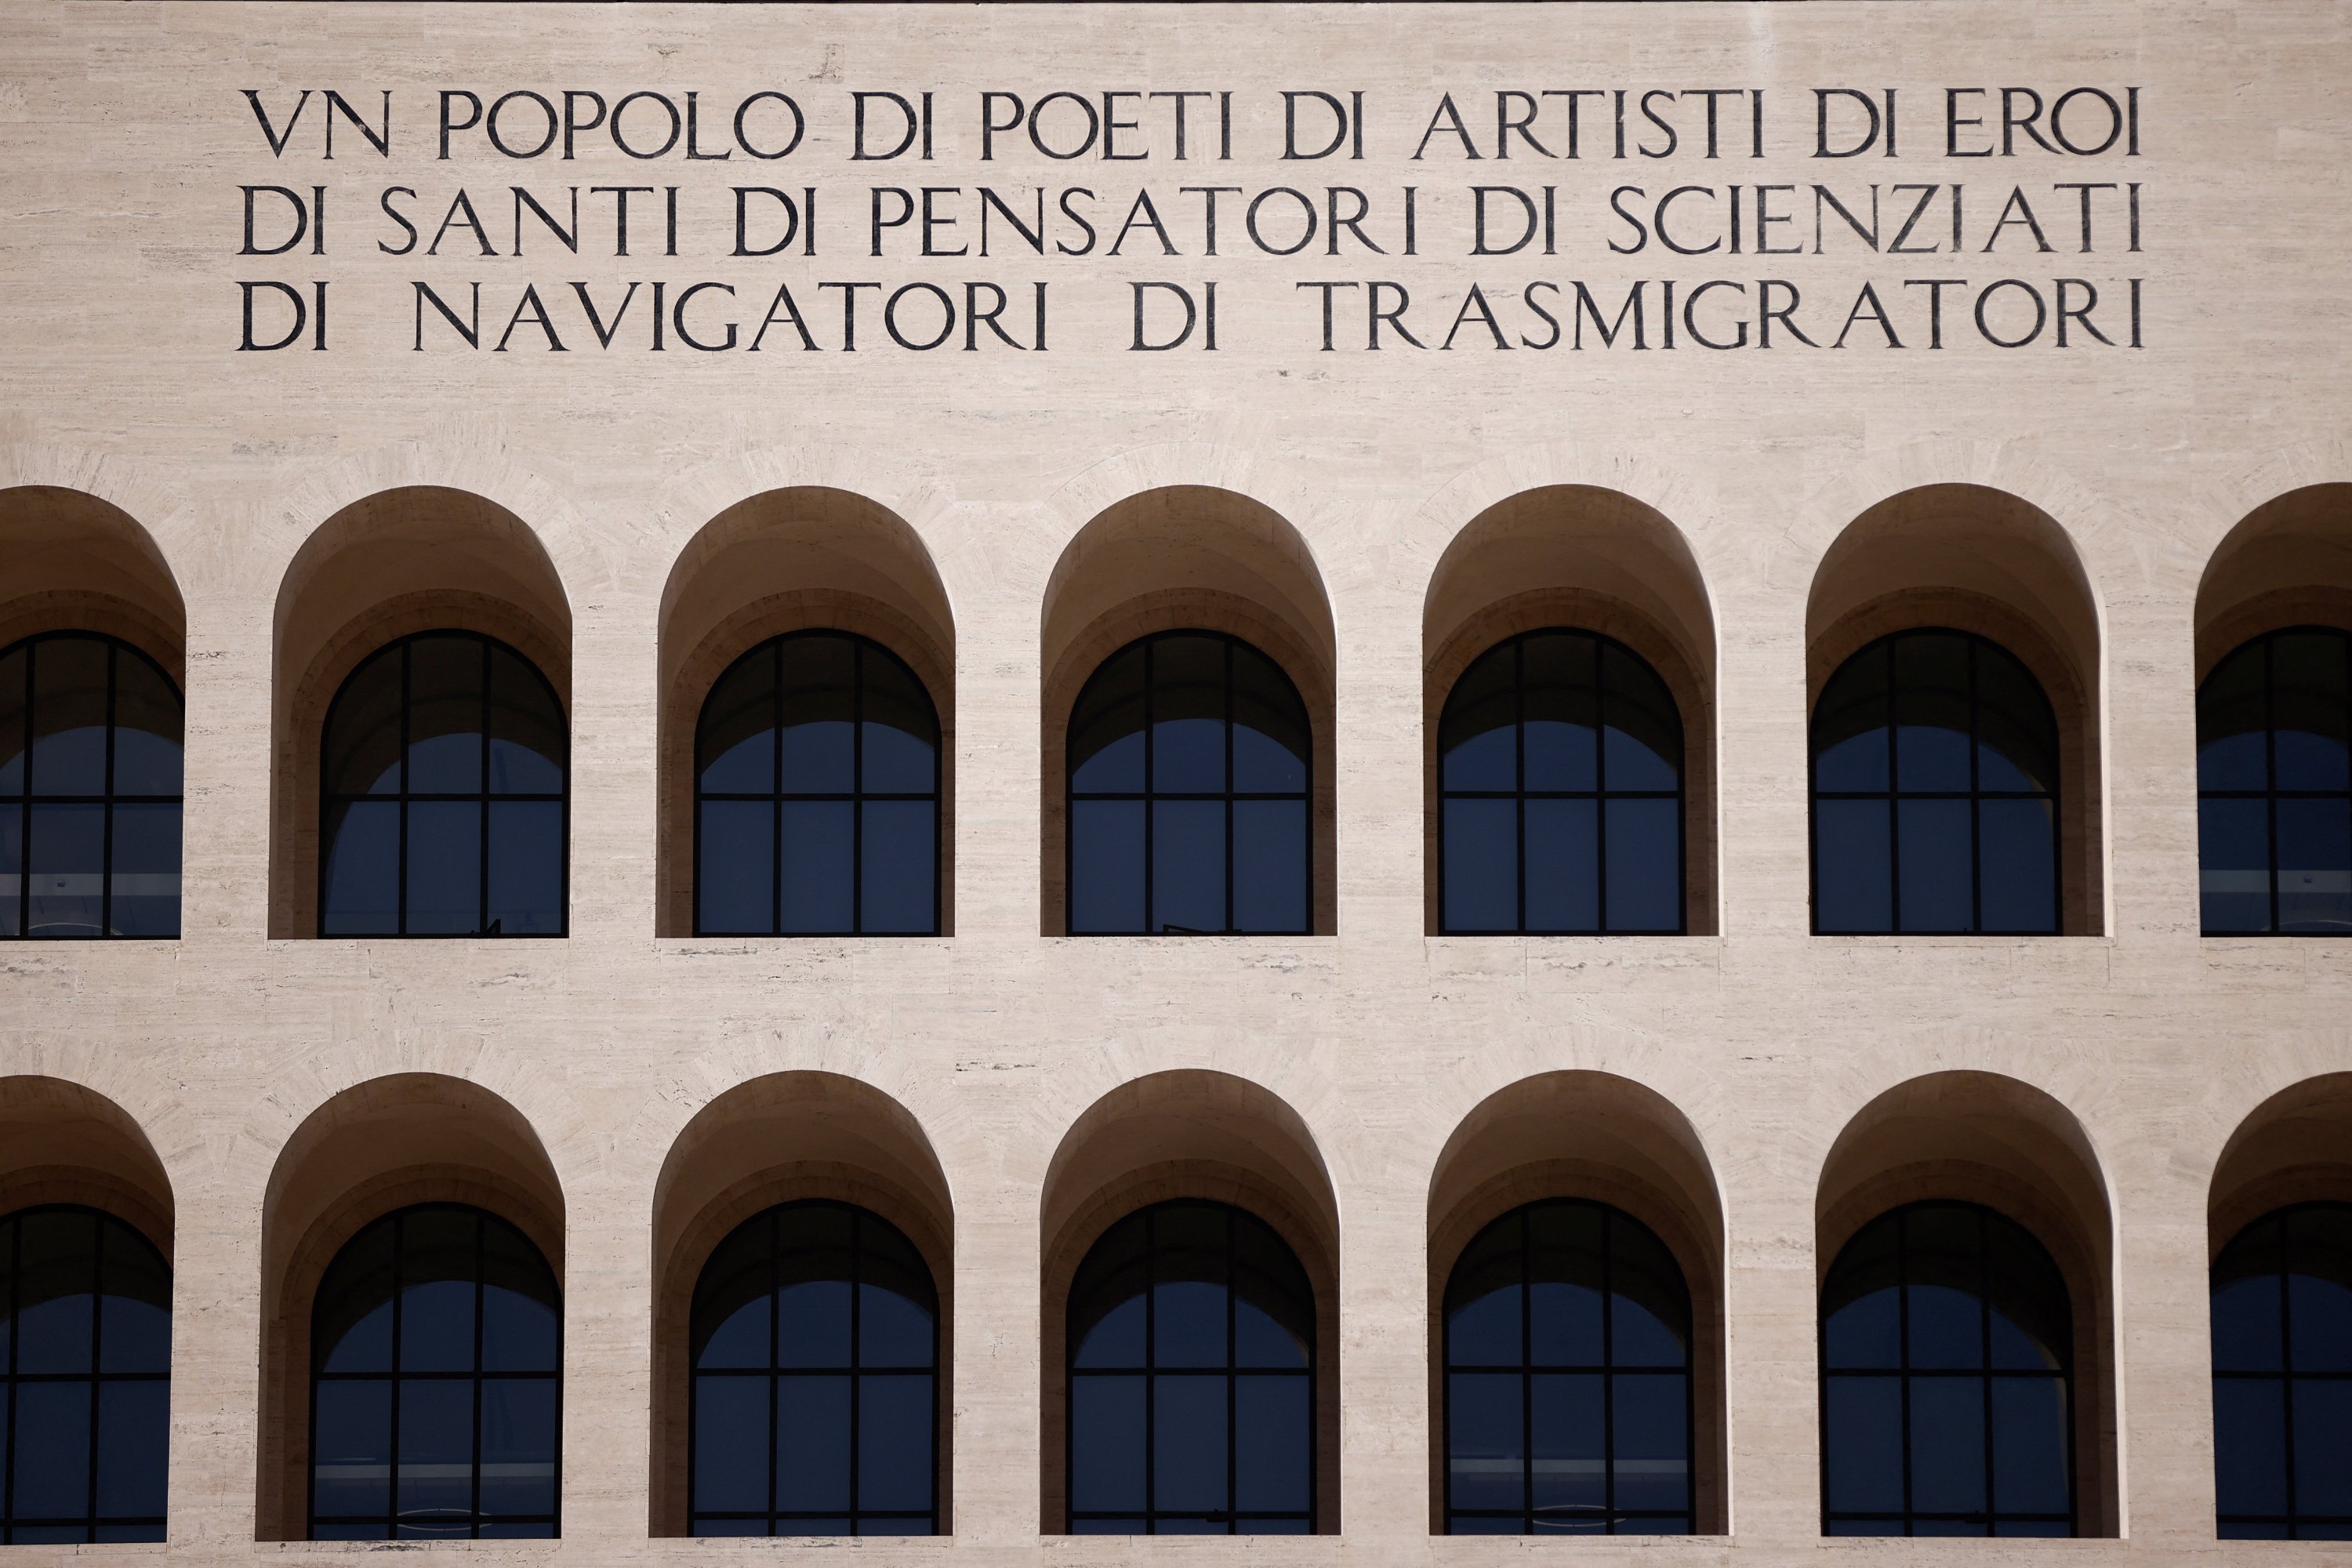 The words of fascist leader Benito Mussolini are carved on the facade of the "Palazzo della Civilta Italiana" also known as "Square Colosseum" in the EUR neighborhood known for its fascist architecture in Rome, Italy, Oct. 19, 2022. (Reuters Photo)